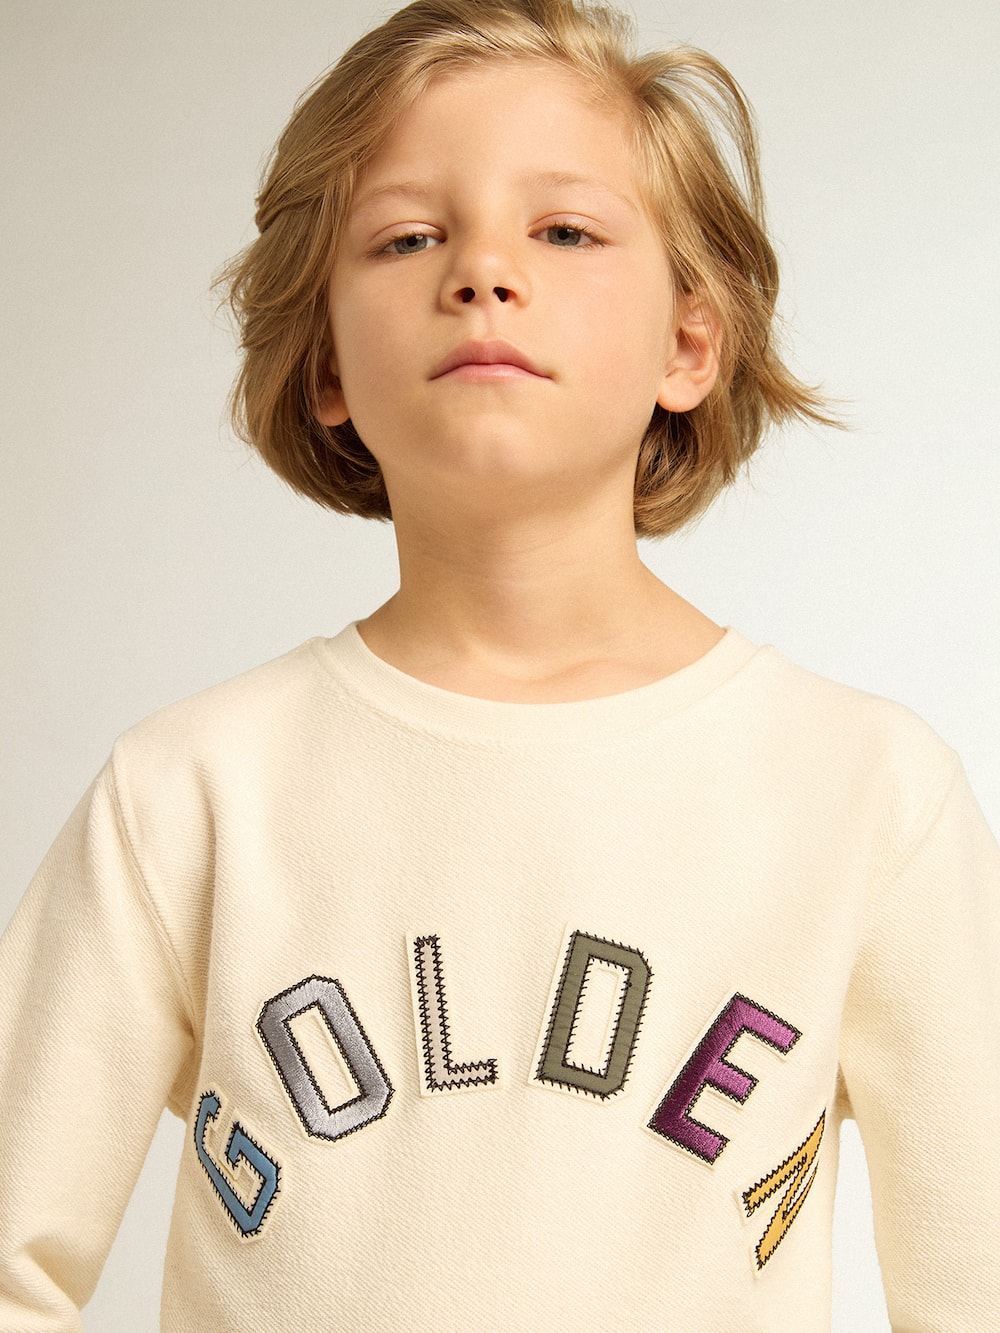 Golden Goose - Sweatshirt in aged white with multicolor Golden lettering on the front in 